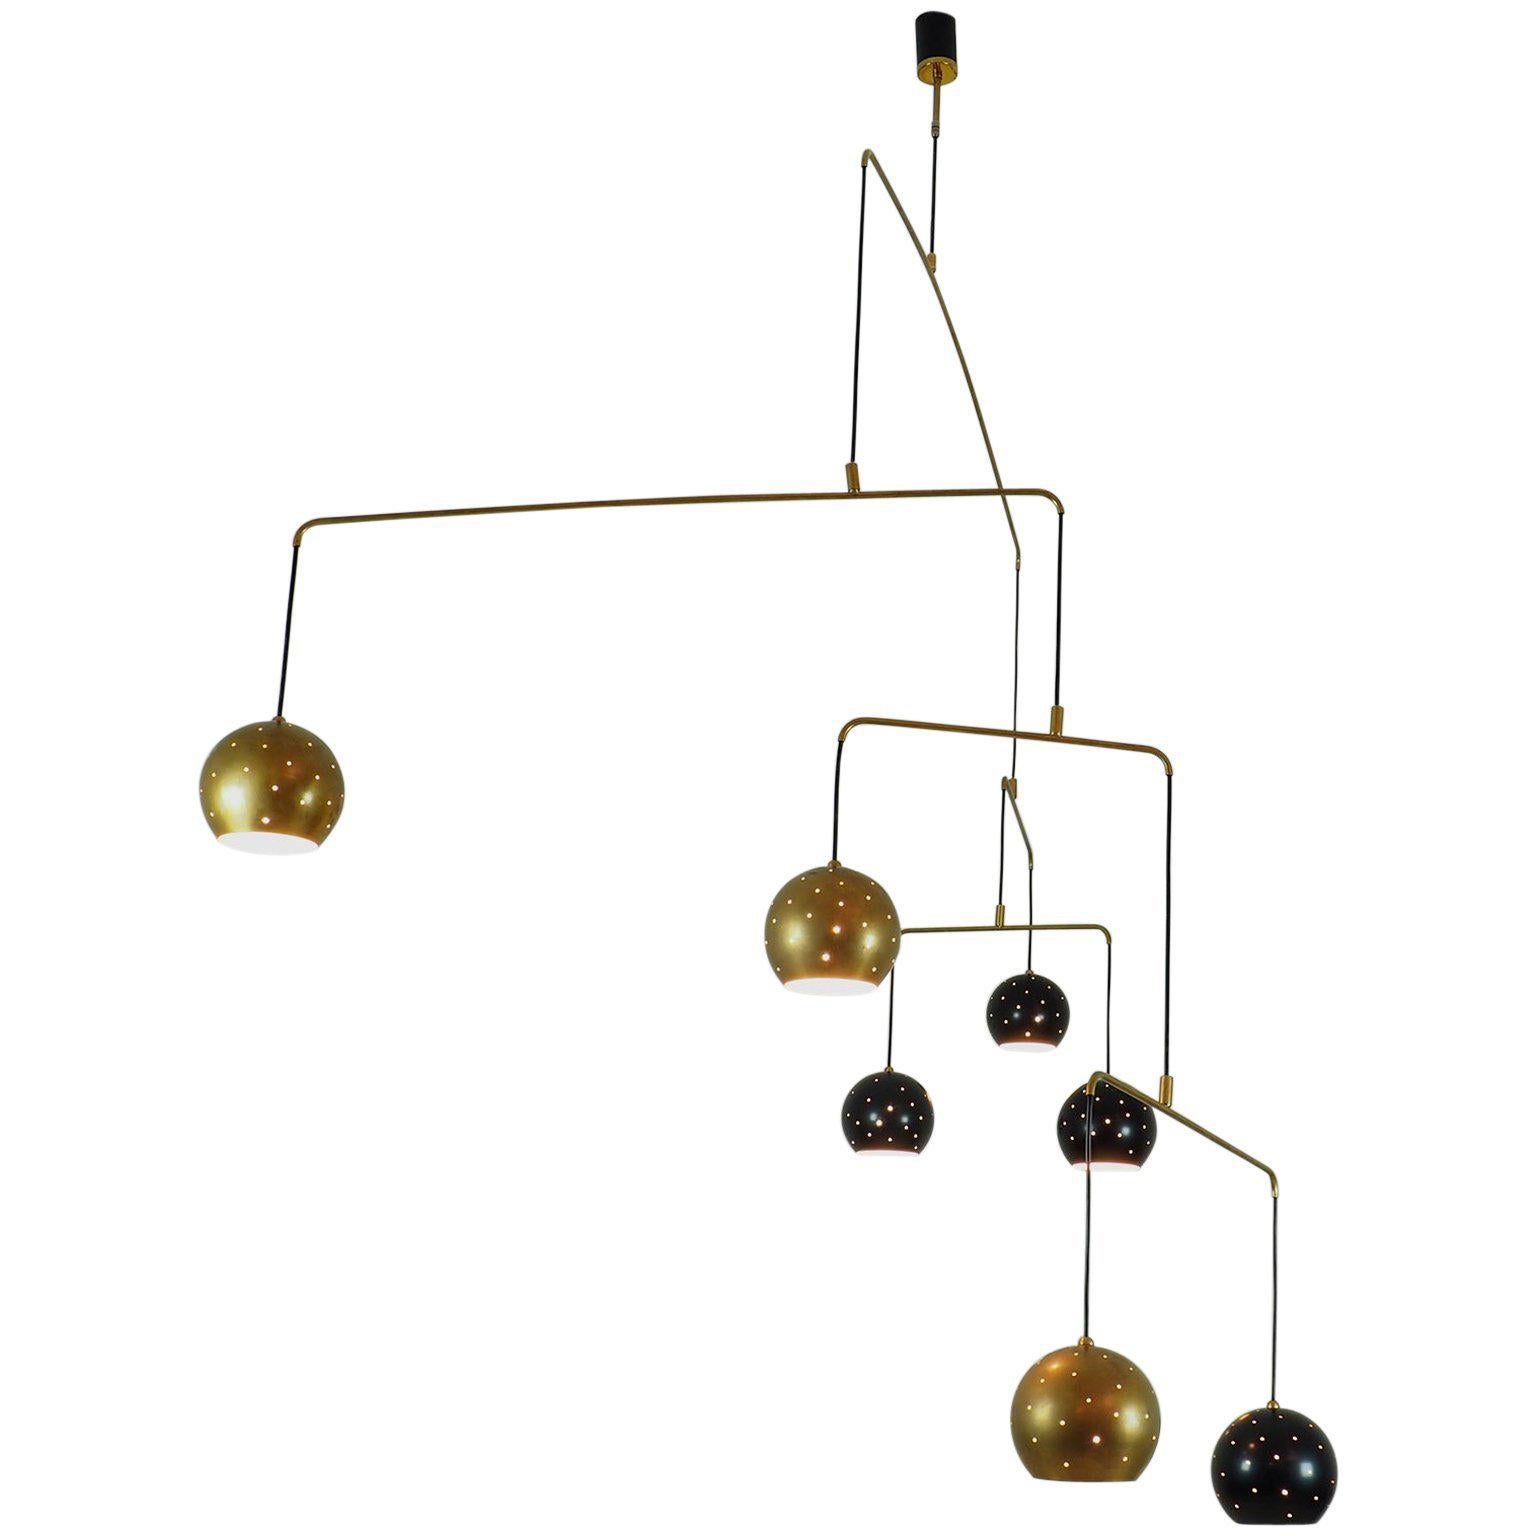 Mobile Large Brass and Black Spheres Chandelier "Magico e Meditativo", Italy